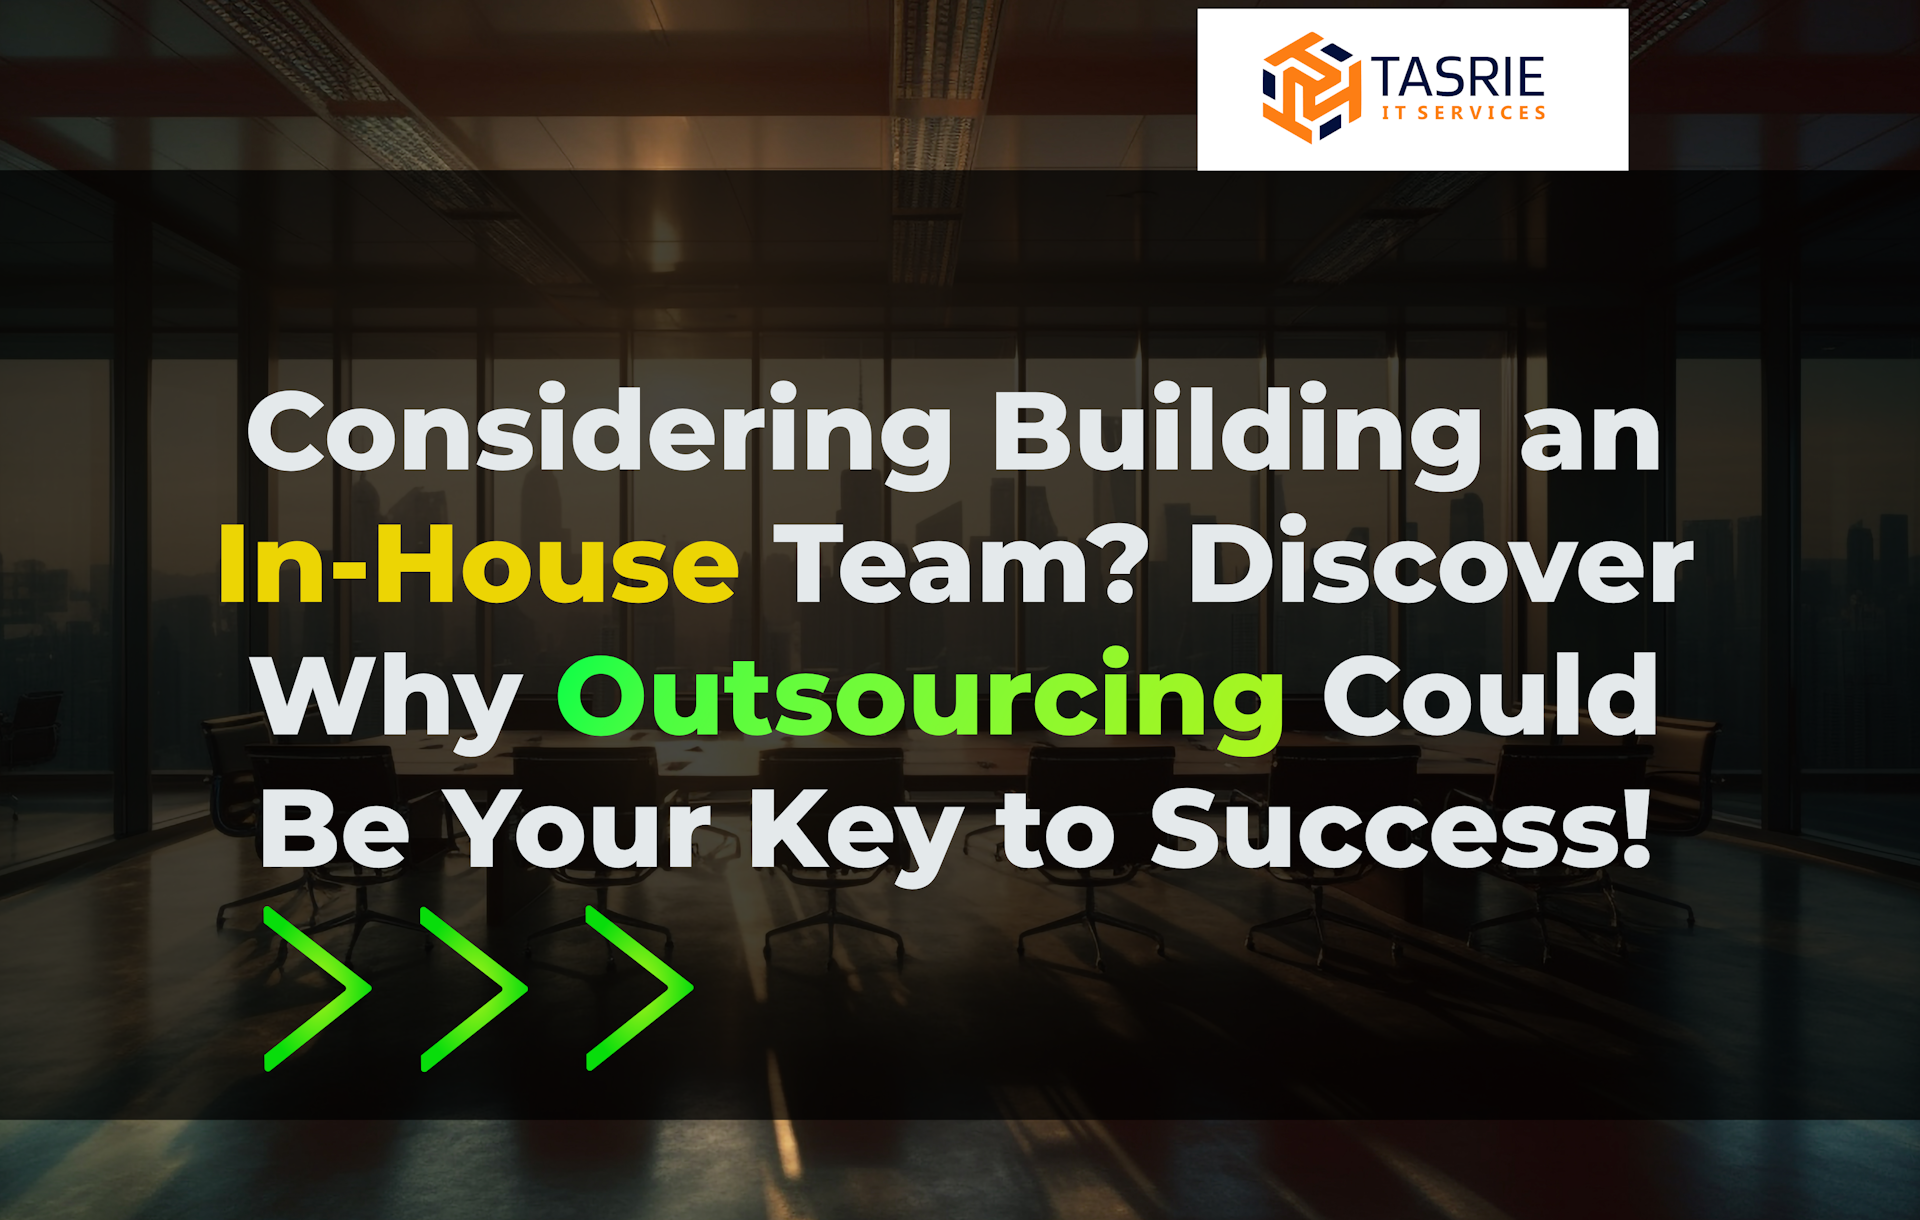 The Advantages of Outsourcing Over In-House Teams